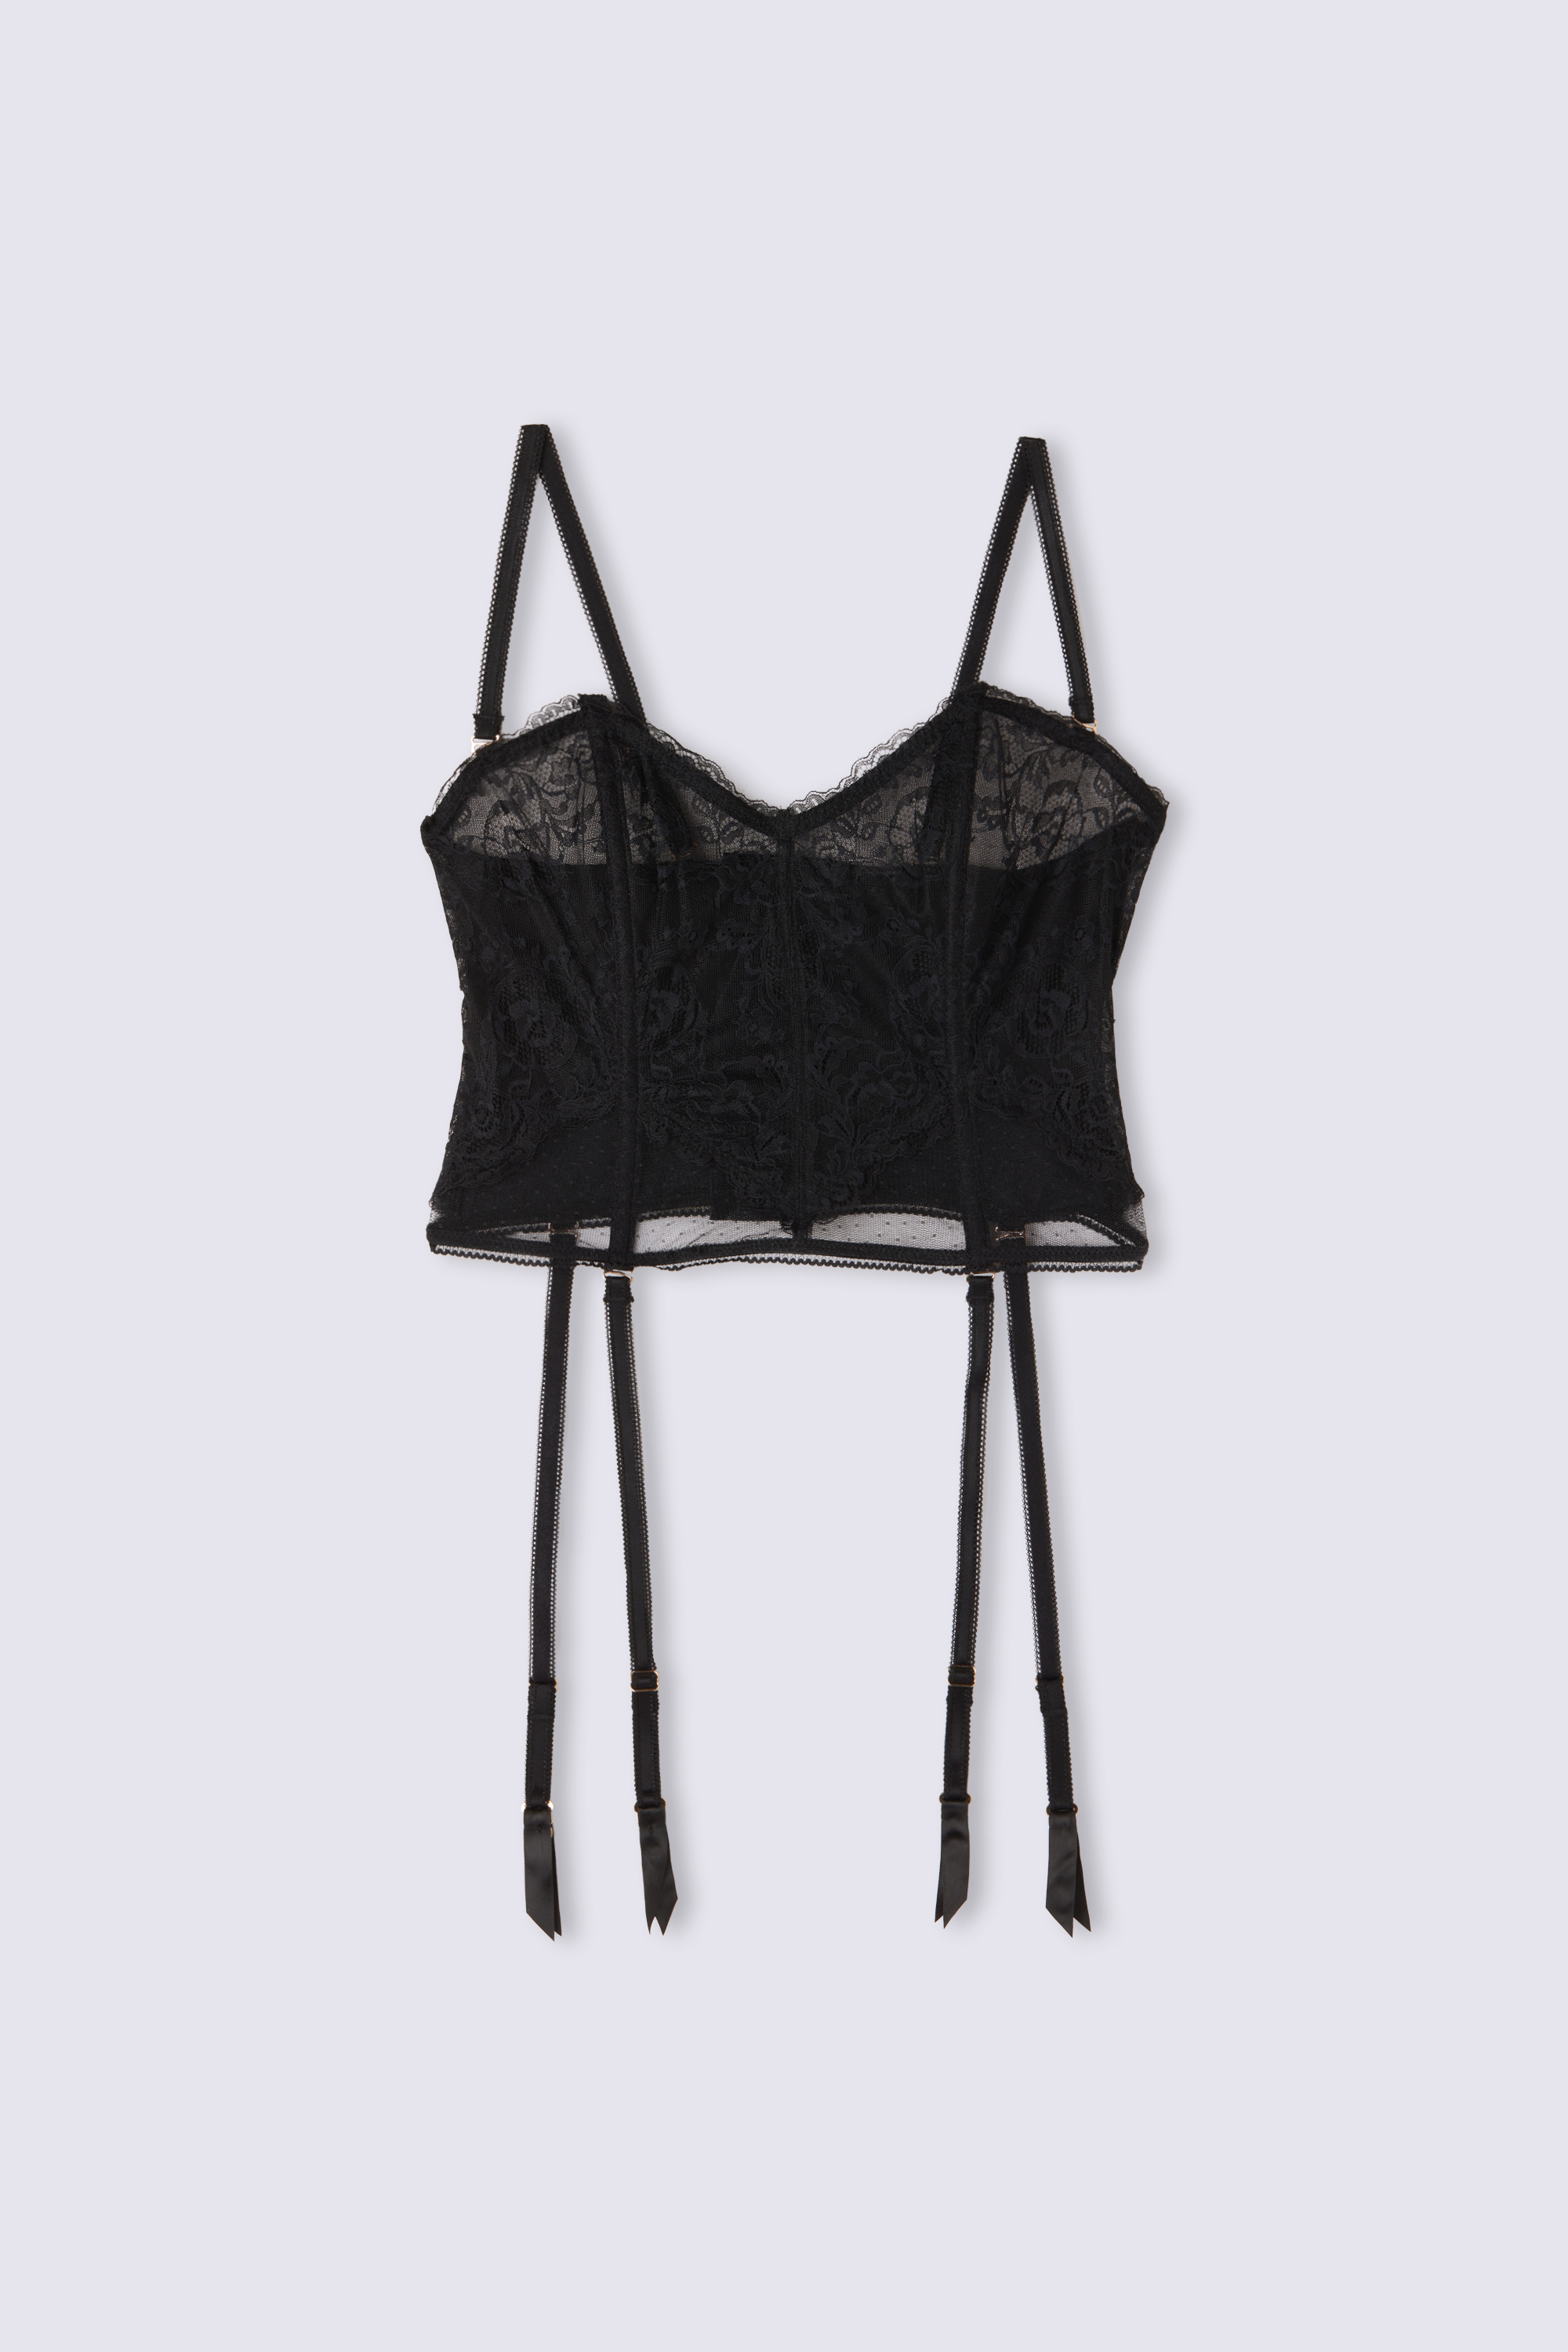 Never Gets Old Lace Basque | Intimissimi